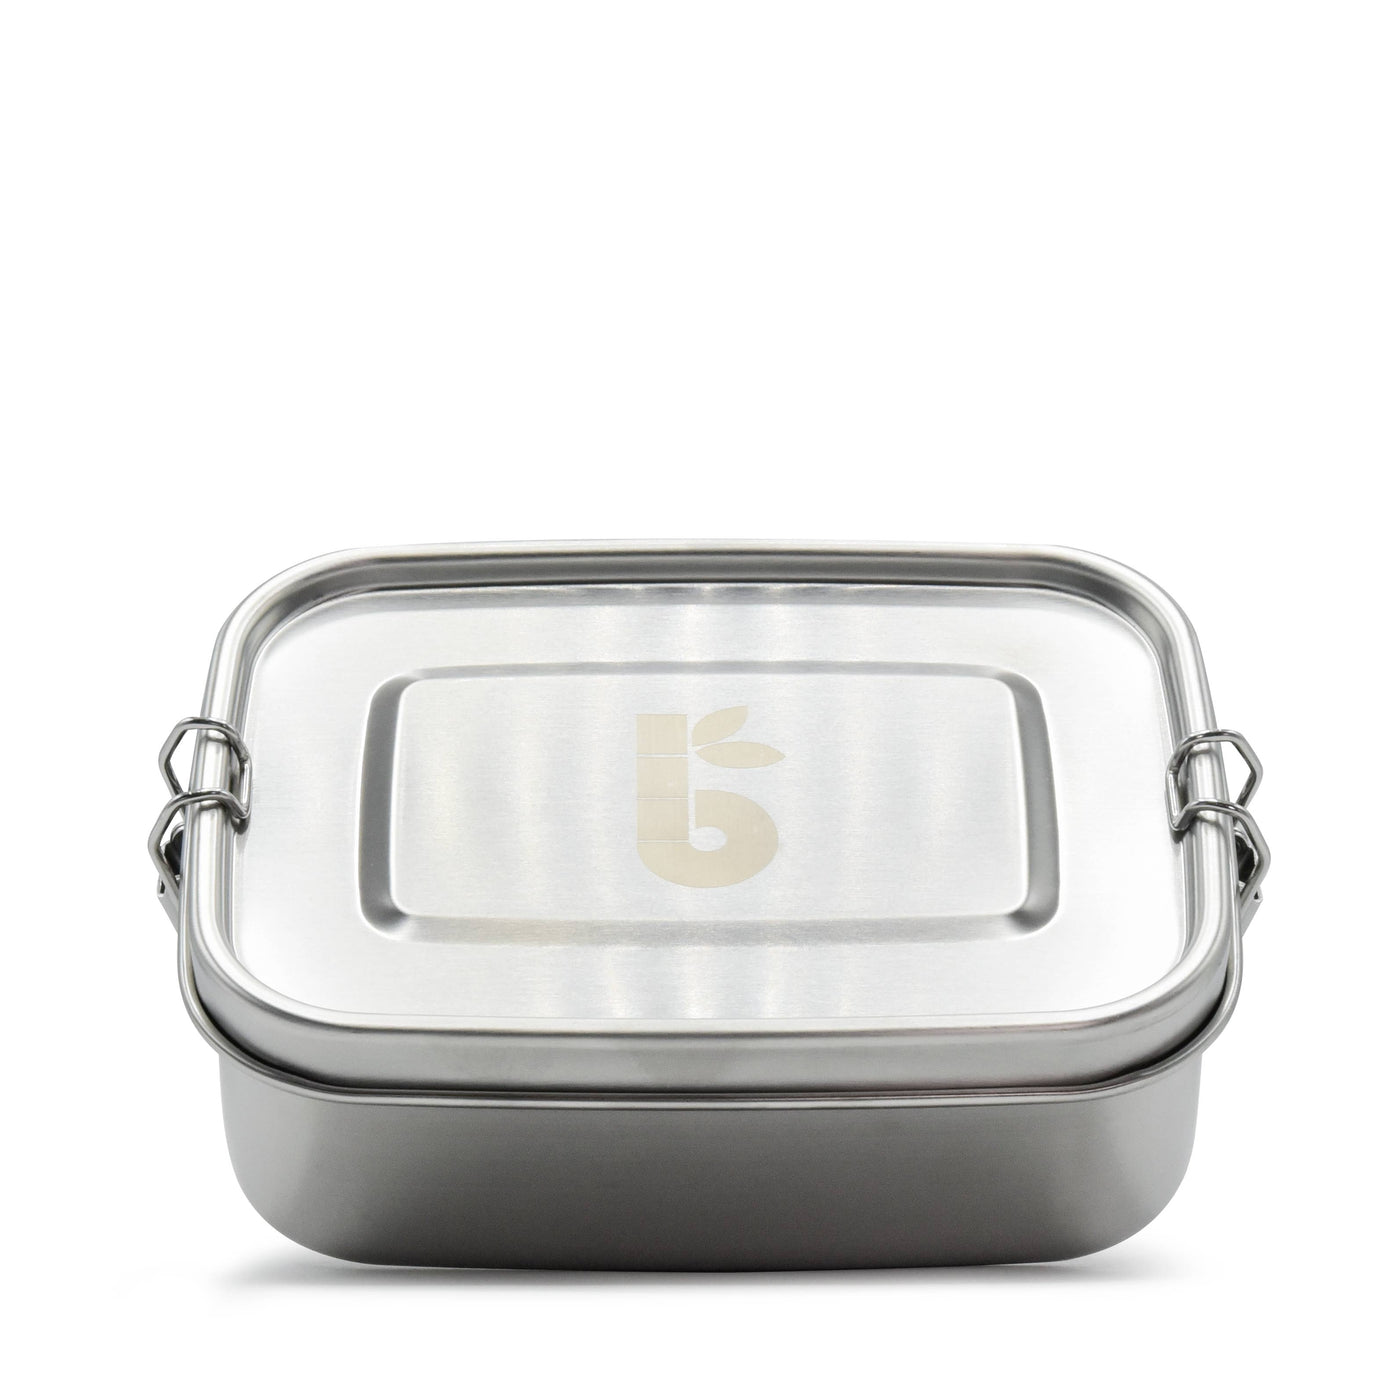 Bambaw Stainless Steel Food Container - 1200ml